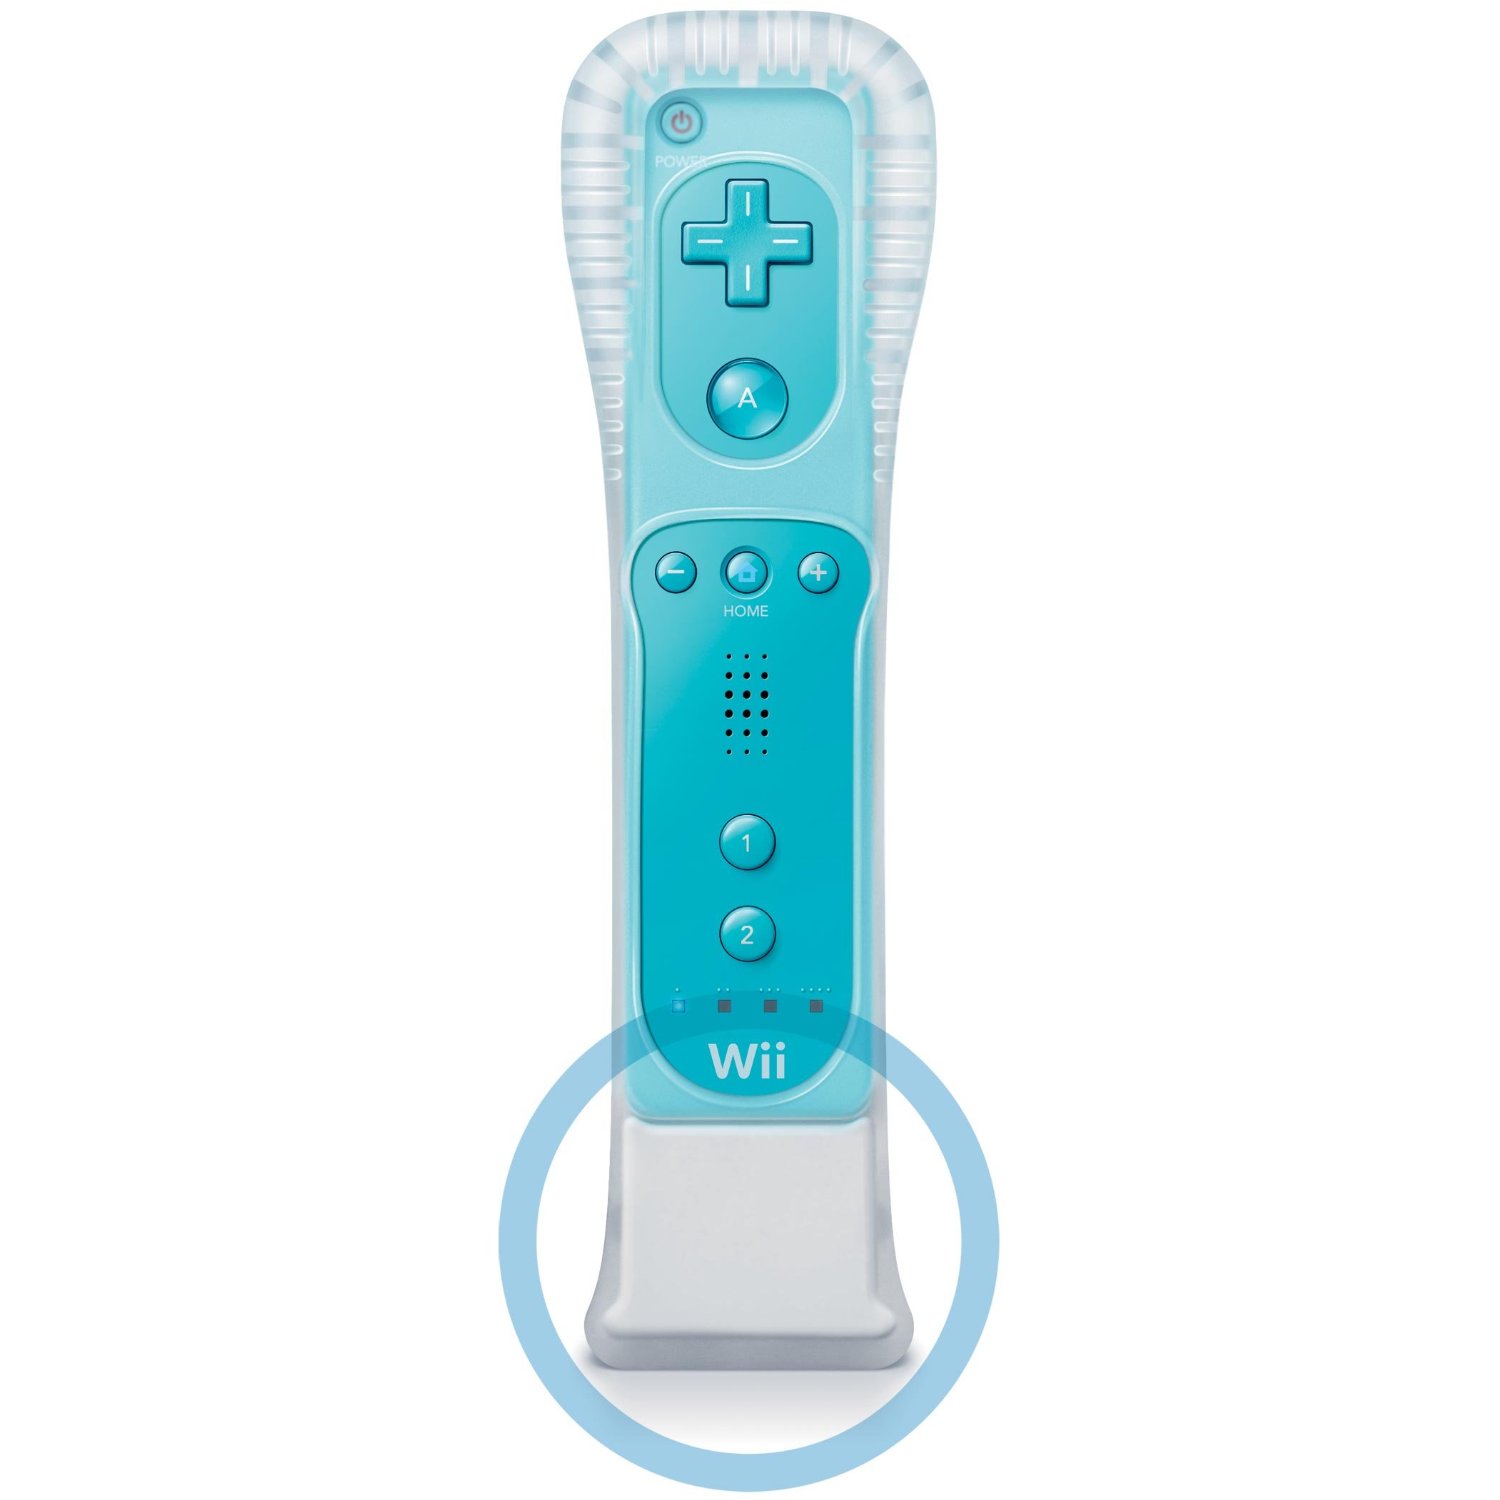 http://thetechjournal.com/wp-content/uploads/images/1111/1321837503-wii-remote-controller--3axis-motion-sensing-1.jpg